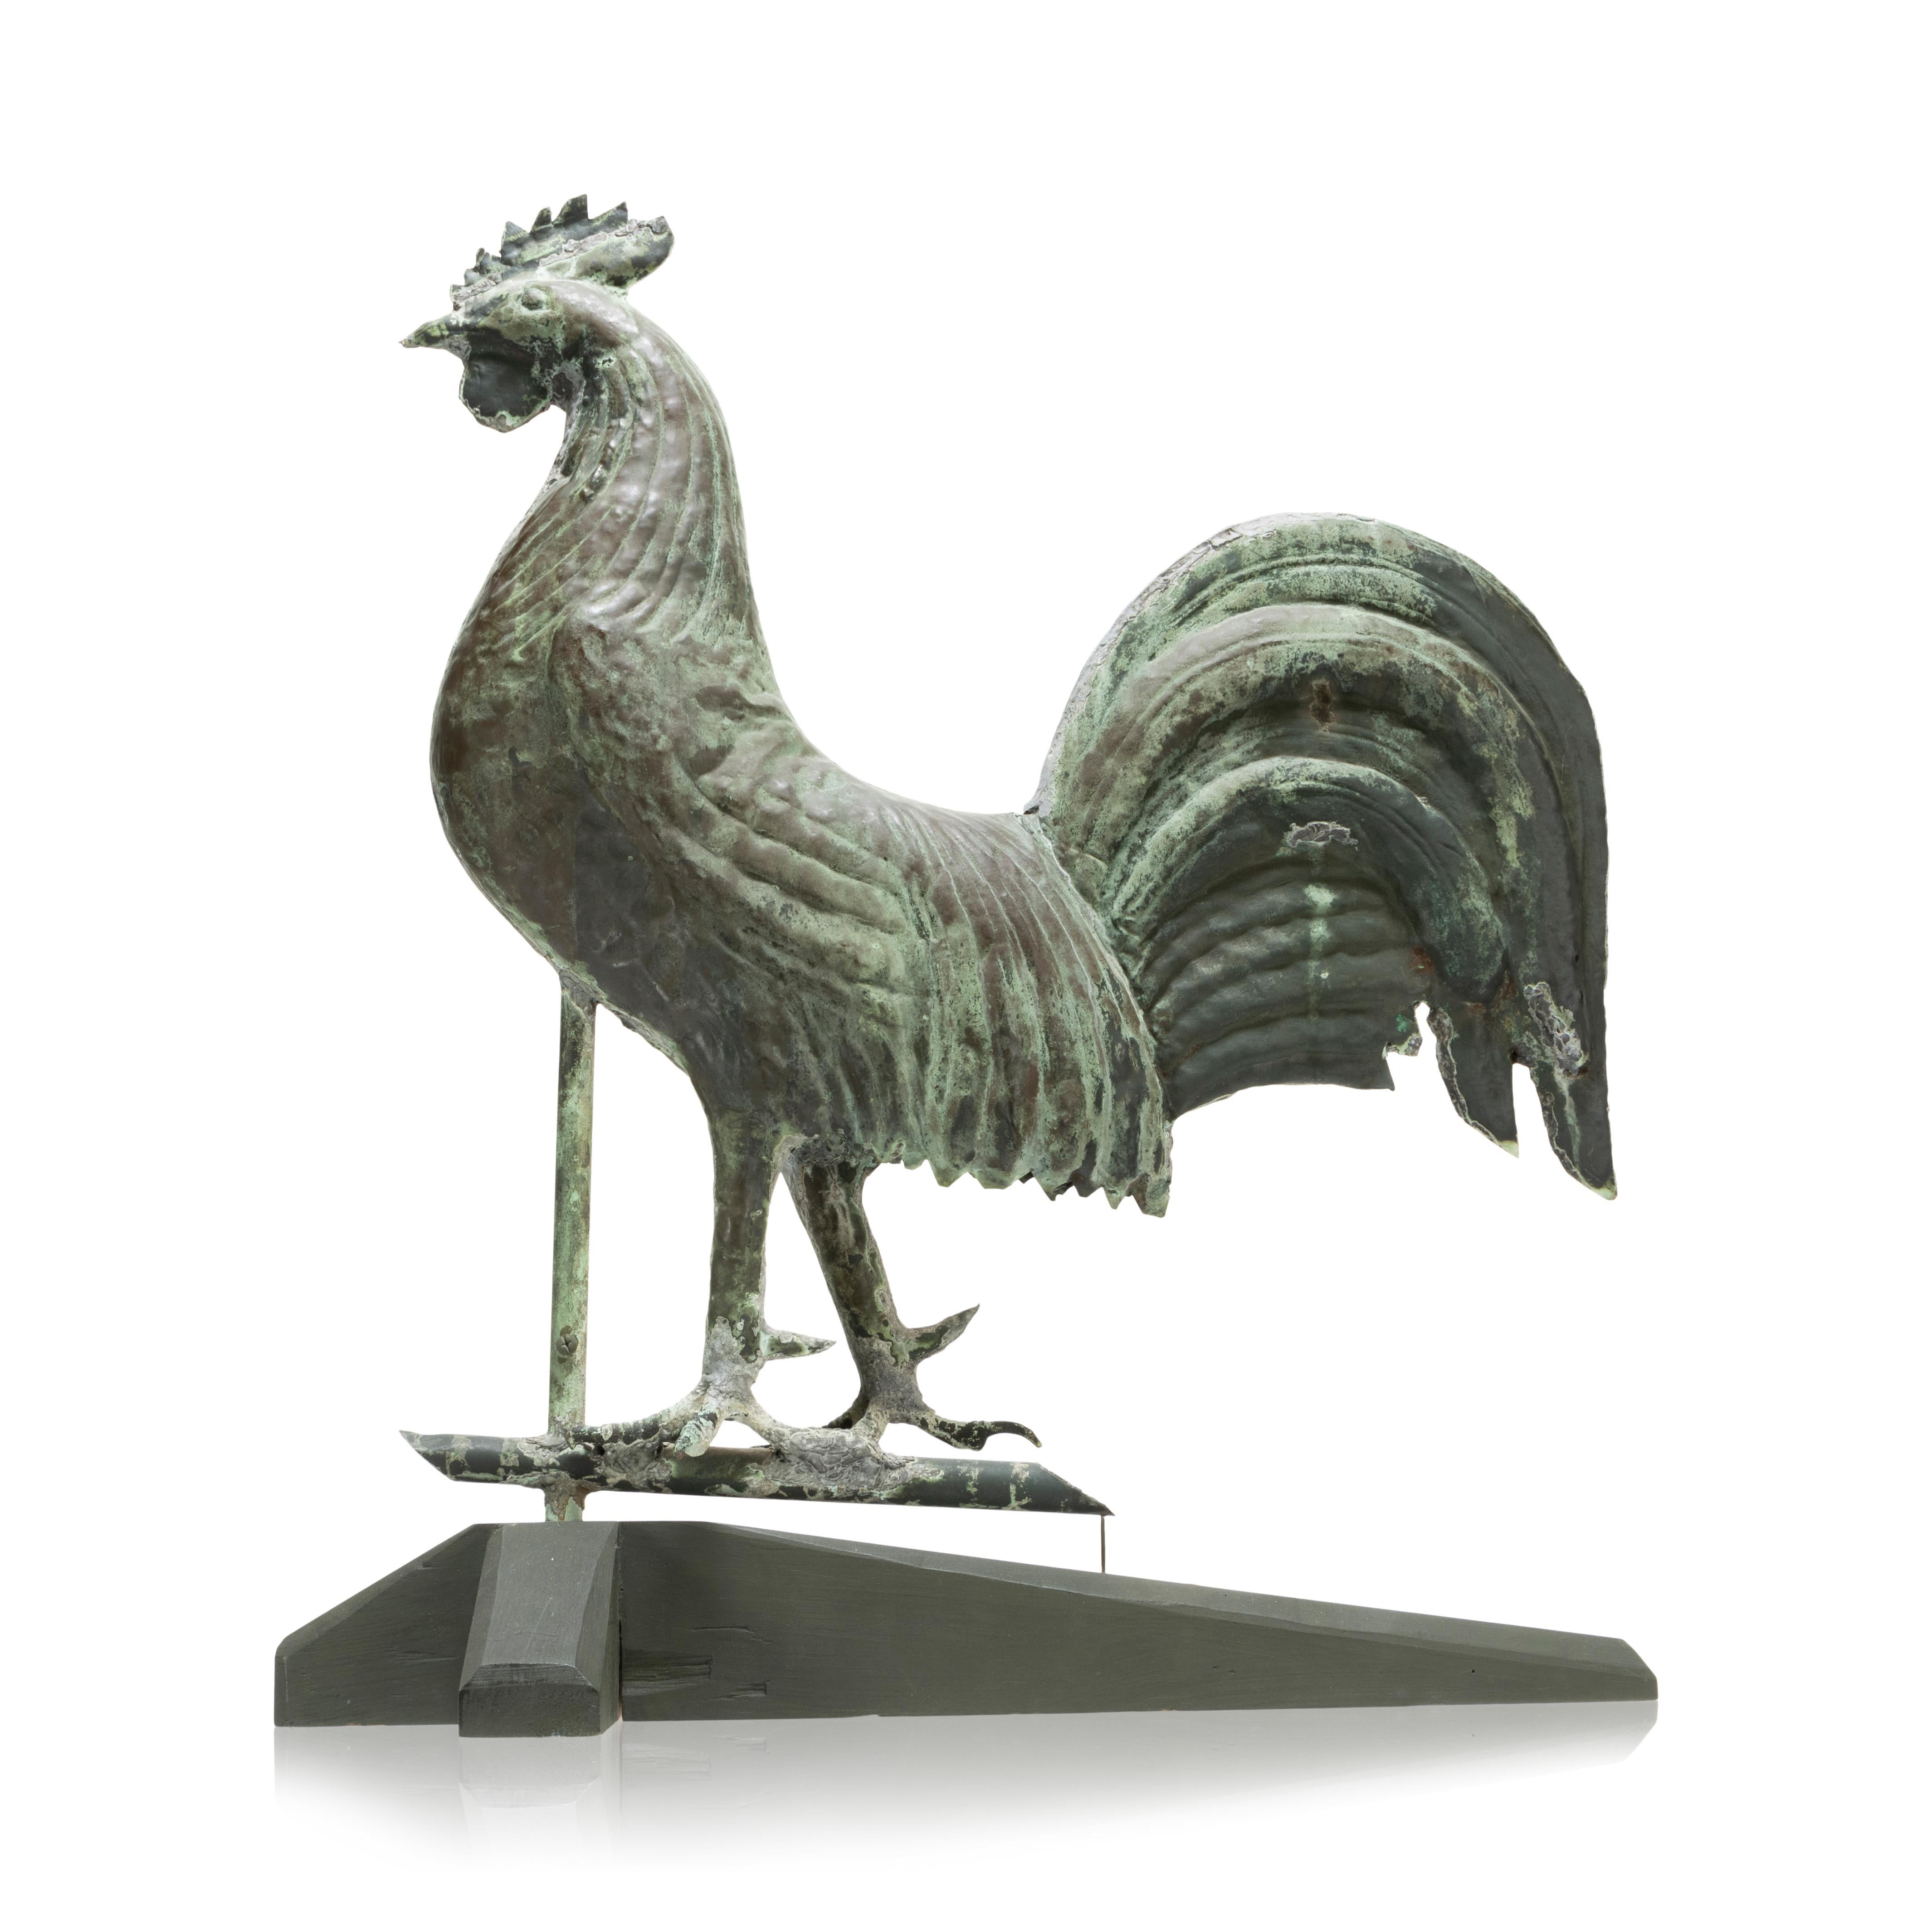 Molded sheet copper rooster weather vane. Flattened full bodied form with molded body and feather details. Large tail with custom wood stand. 20